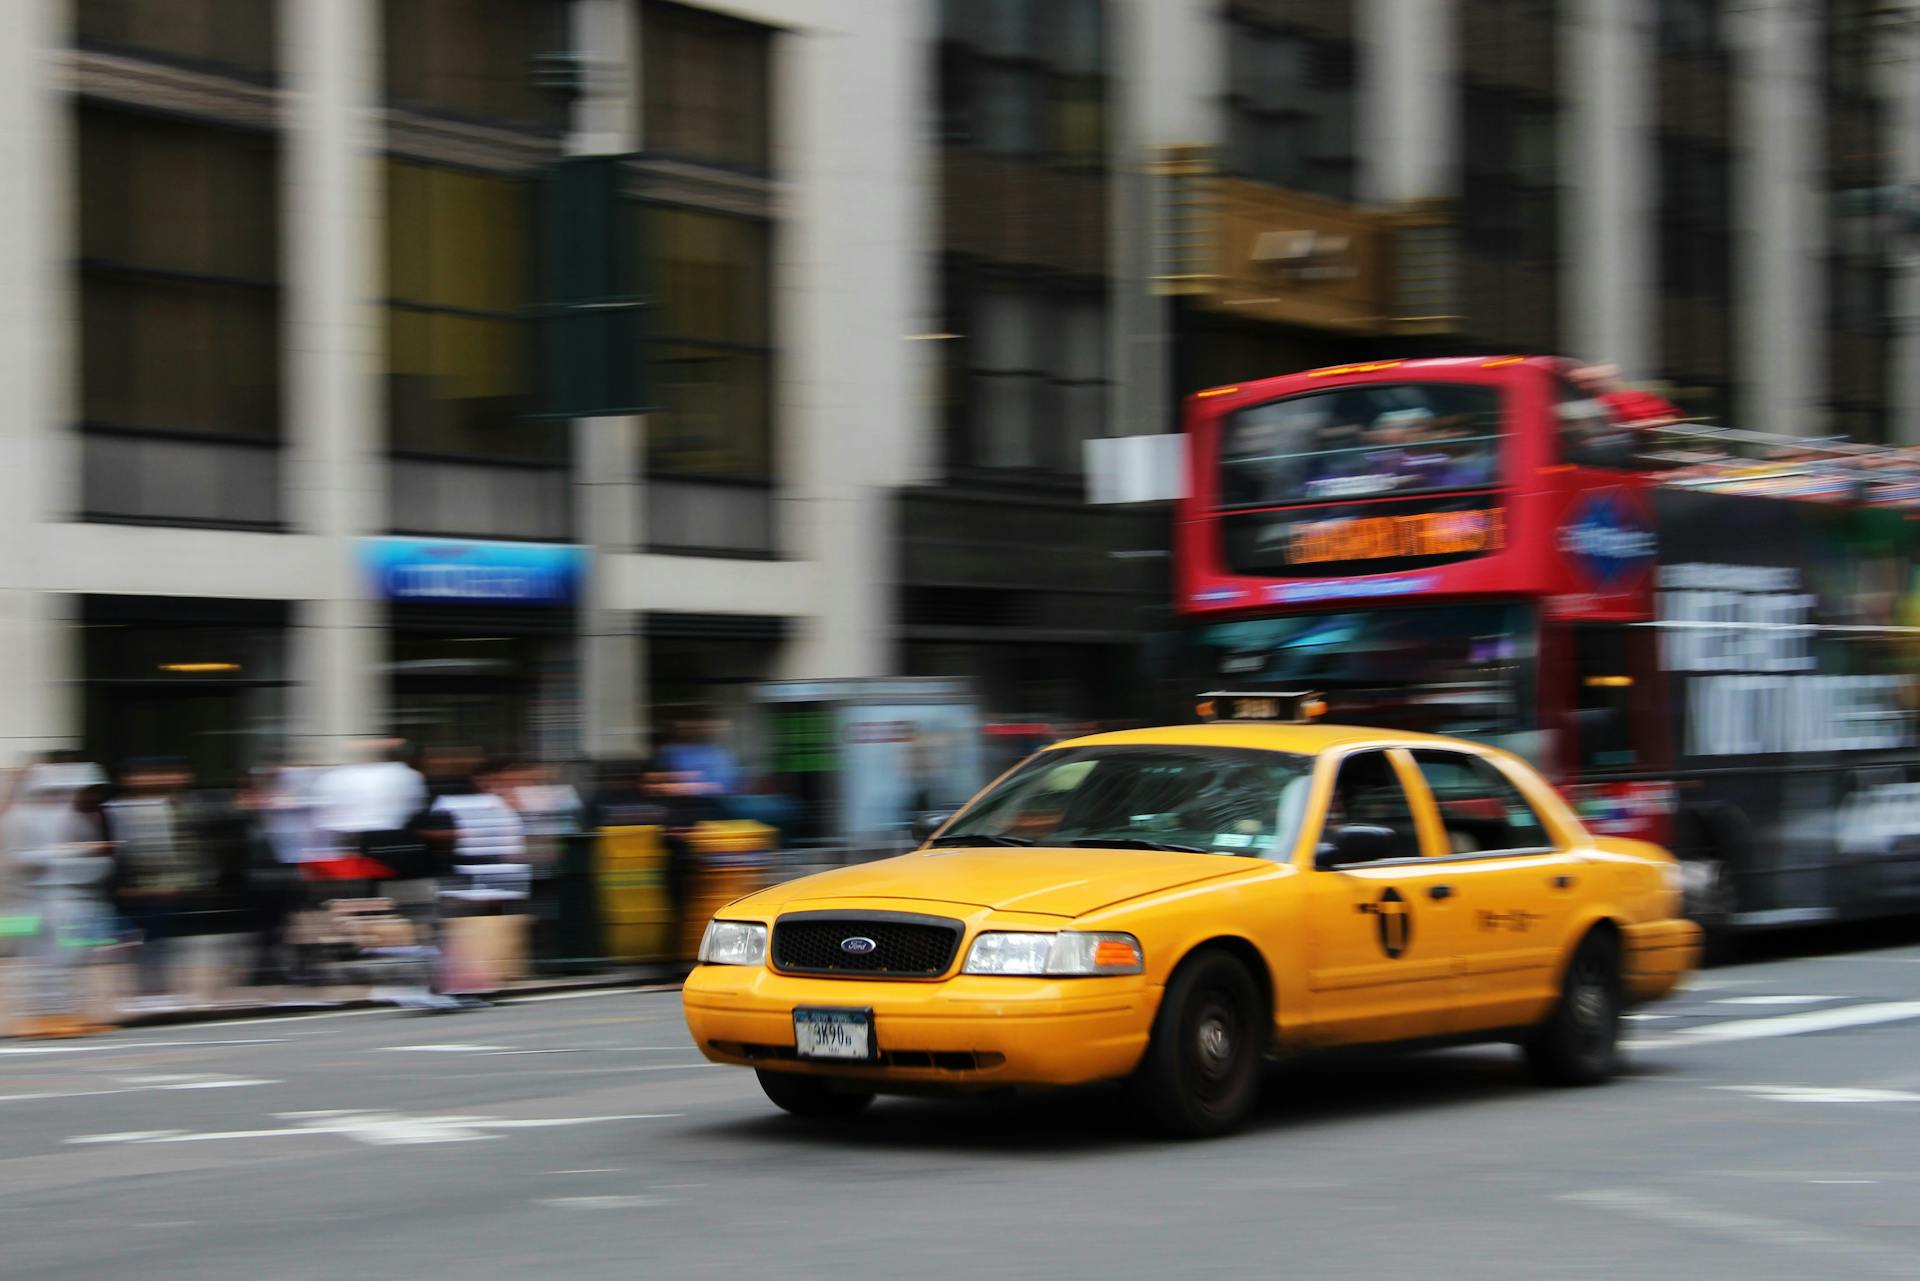 A cab on a busy road | Source: Pexels